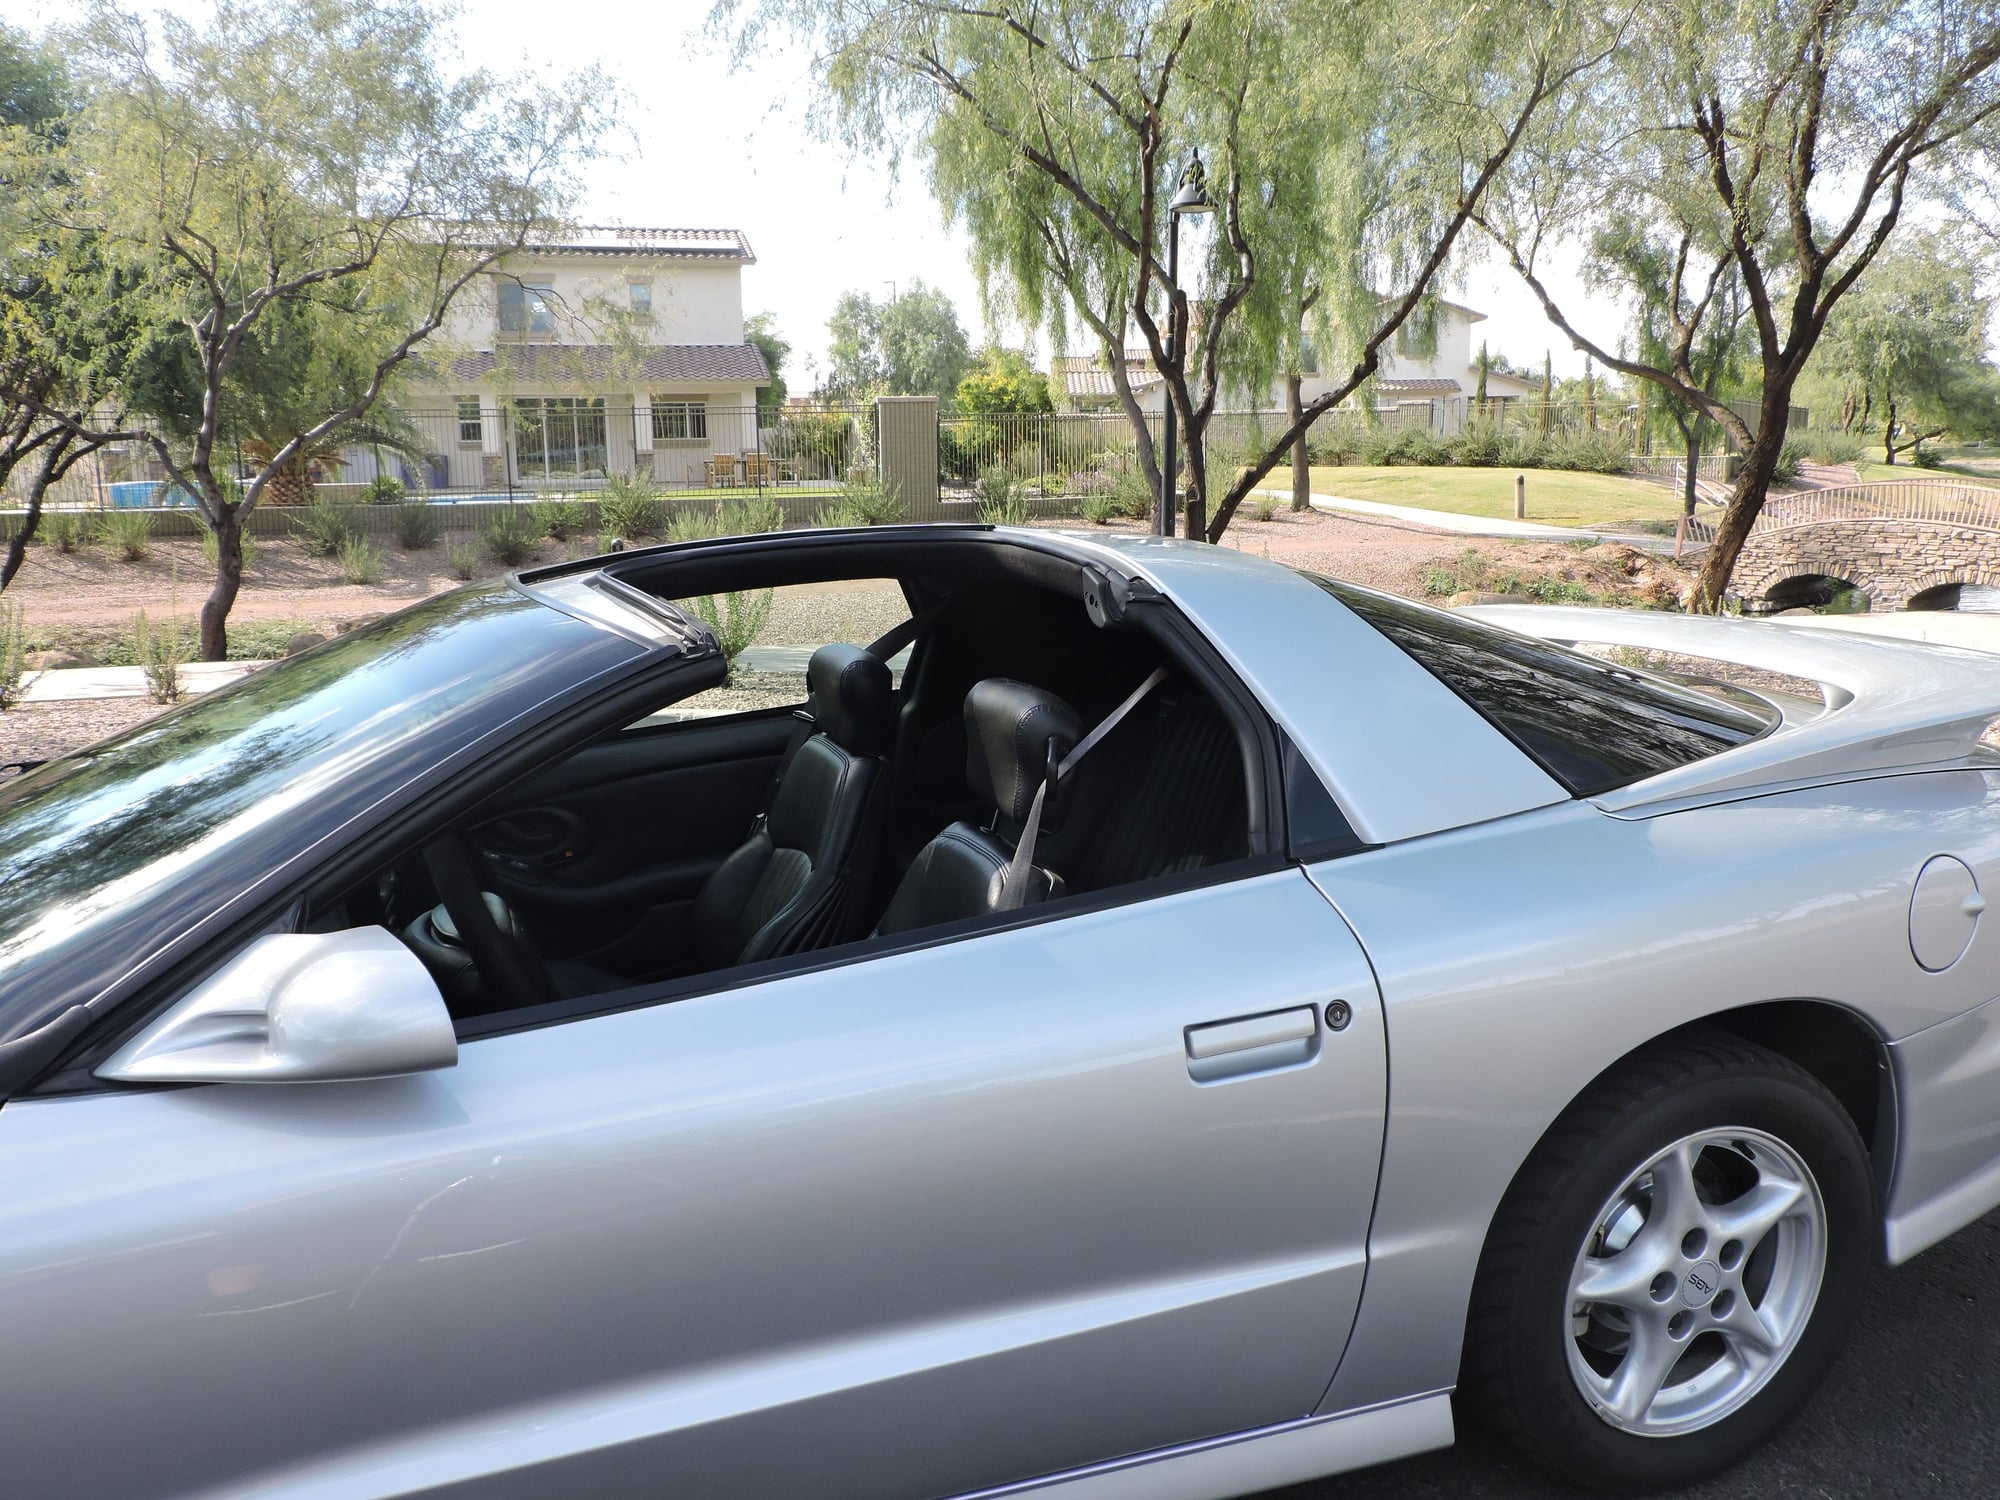 2002 Pontiac Firebird - 17,000 mile Trans Am - Used - VIN 2G2FV22G822132236 - 17,020 Miles - 8 cyl - 2WD - Automatic - Coupe - Silver - Chandler, AZ 85286, United States